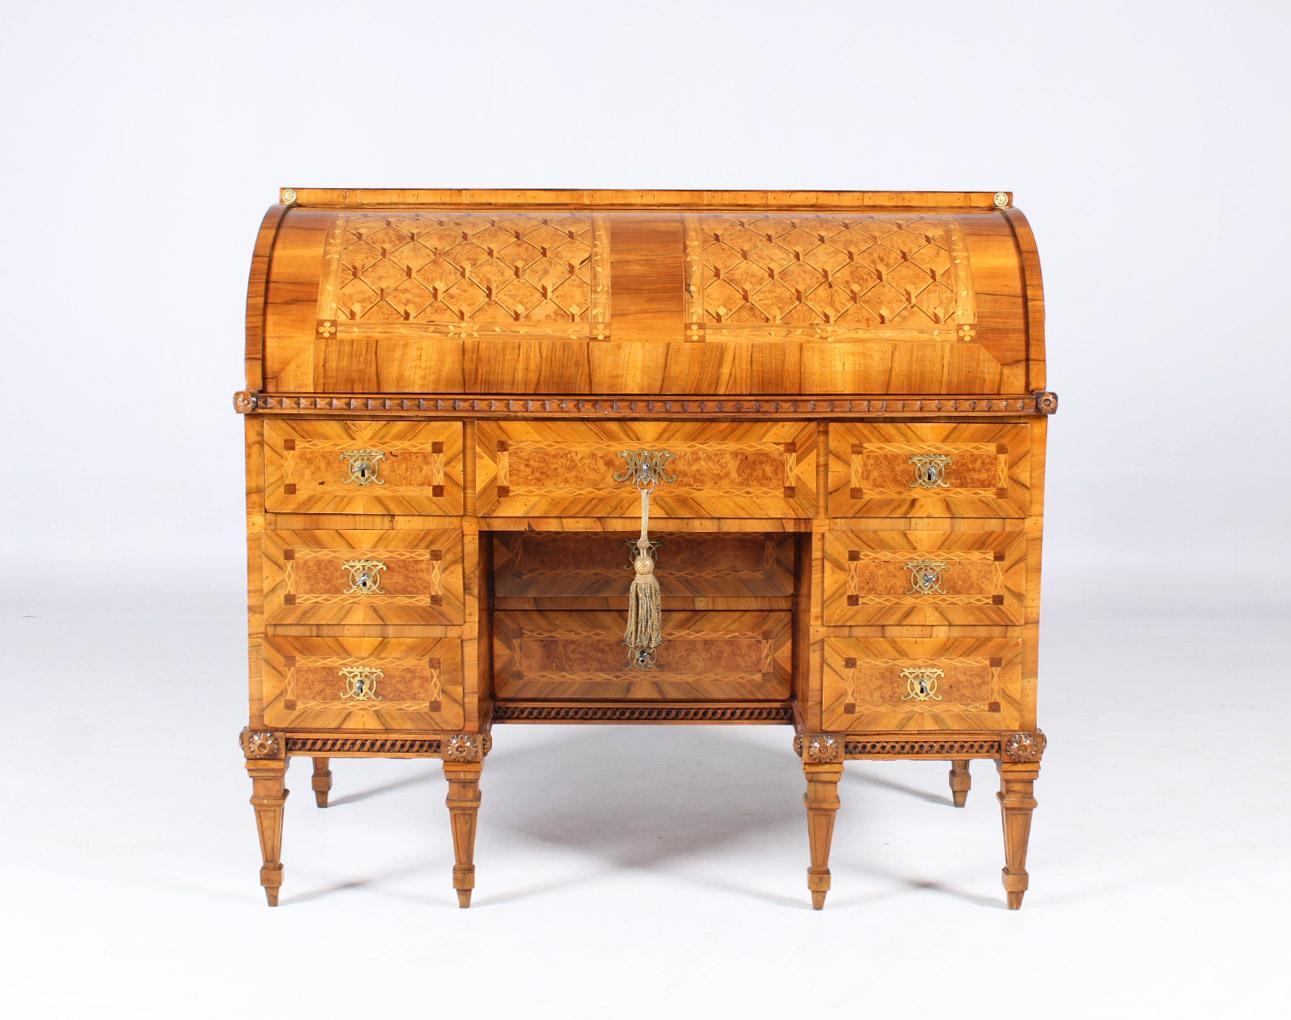 Louis XVI cylinder bureau

South Germany
Walnut etc.
Louis XVI, around 1780

Dimensions: H x W x D: 114 x 125 x 61 cm

Writing furniture standing on typical classicist pointed legs.
Walnut, maple and burl veneered on spruce.

Finely